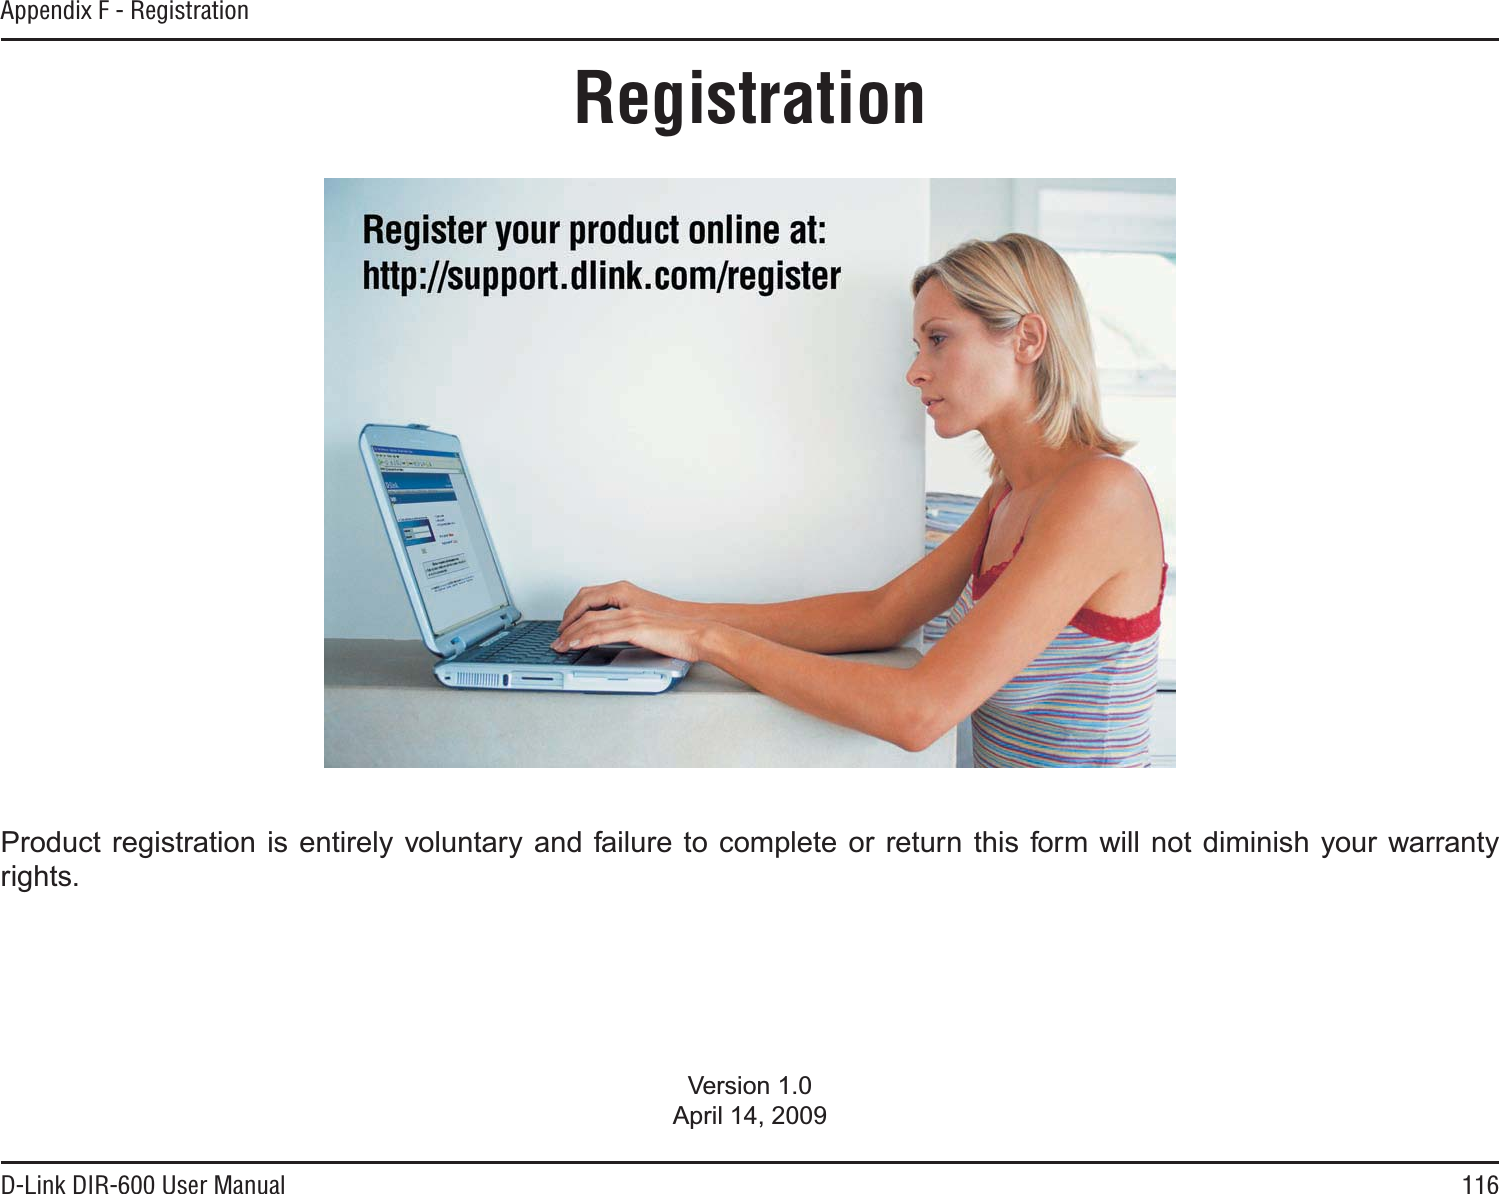 116D-Link DIR-600 User ManualAppendix F - RegistrationVersion 1.0April 14, 2009Product registration is entirely voluntary and failure to complete or return this form will not diminish your warrantyrights.Registration